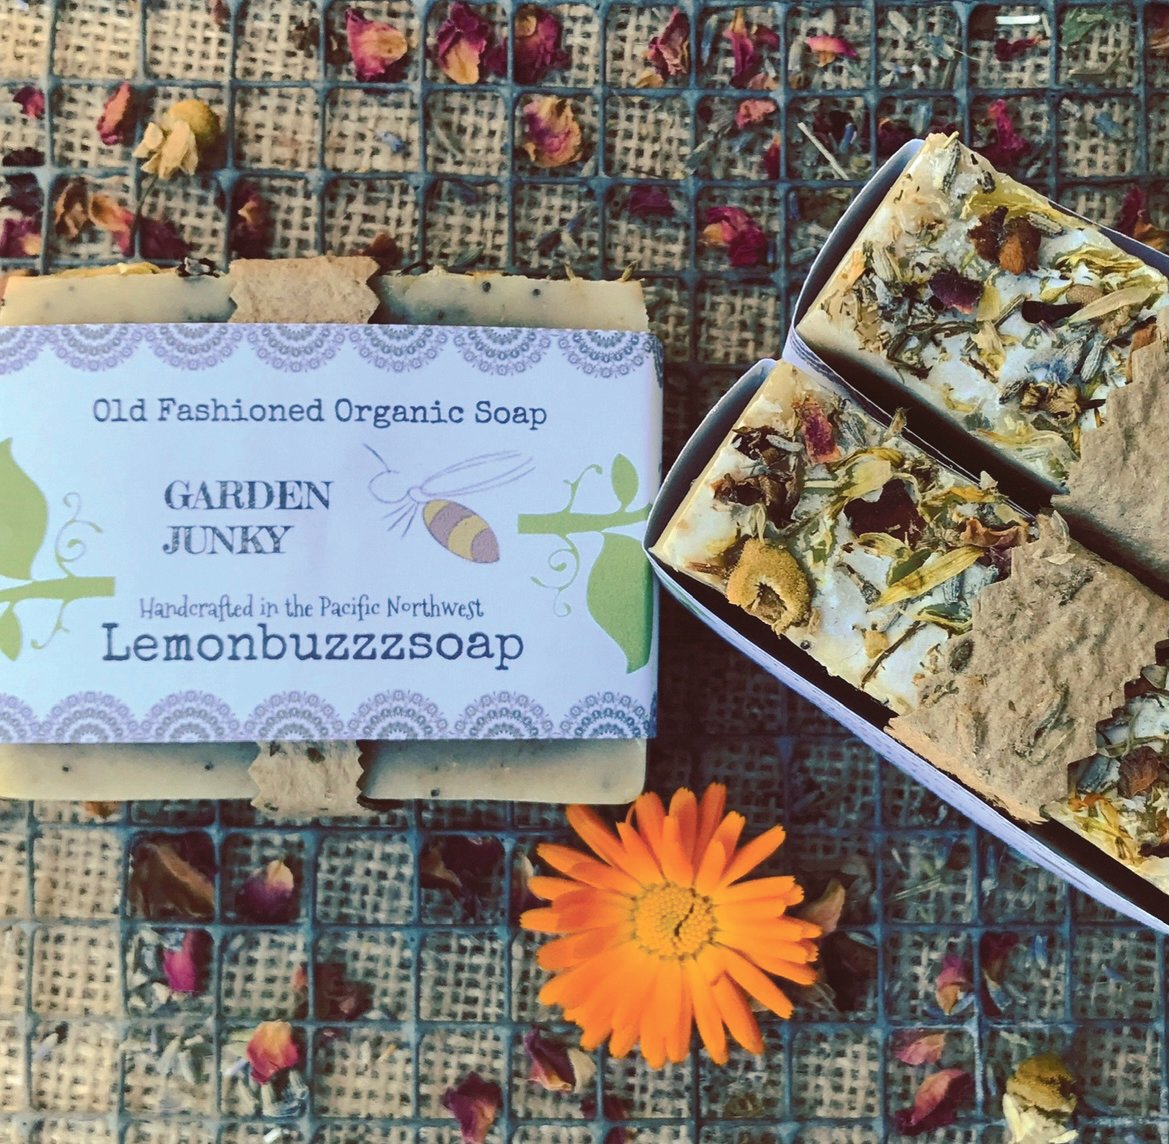 Bars of soap made with flowers, herbs and ingredients from their Centralia farm and wrapped in homemade seed paper containing seeds for plants that benefit pollinators are just one of the local, sustainable products available from Lemonbuzzzsoap.